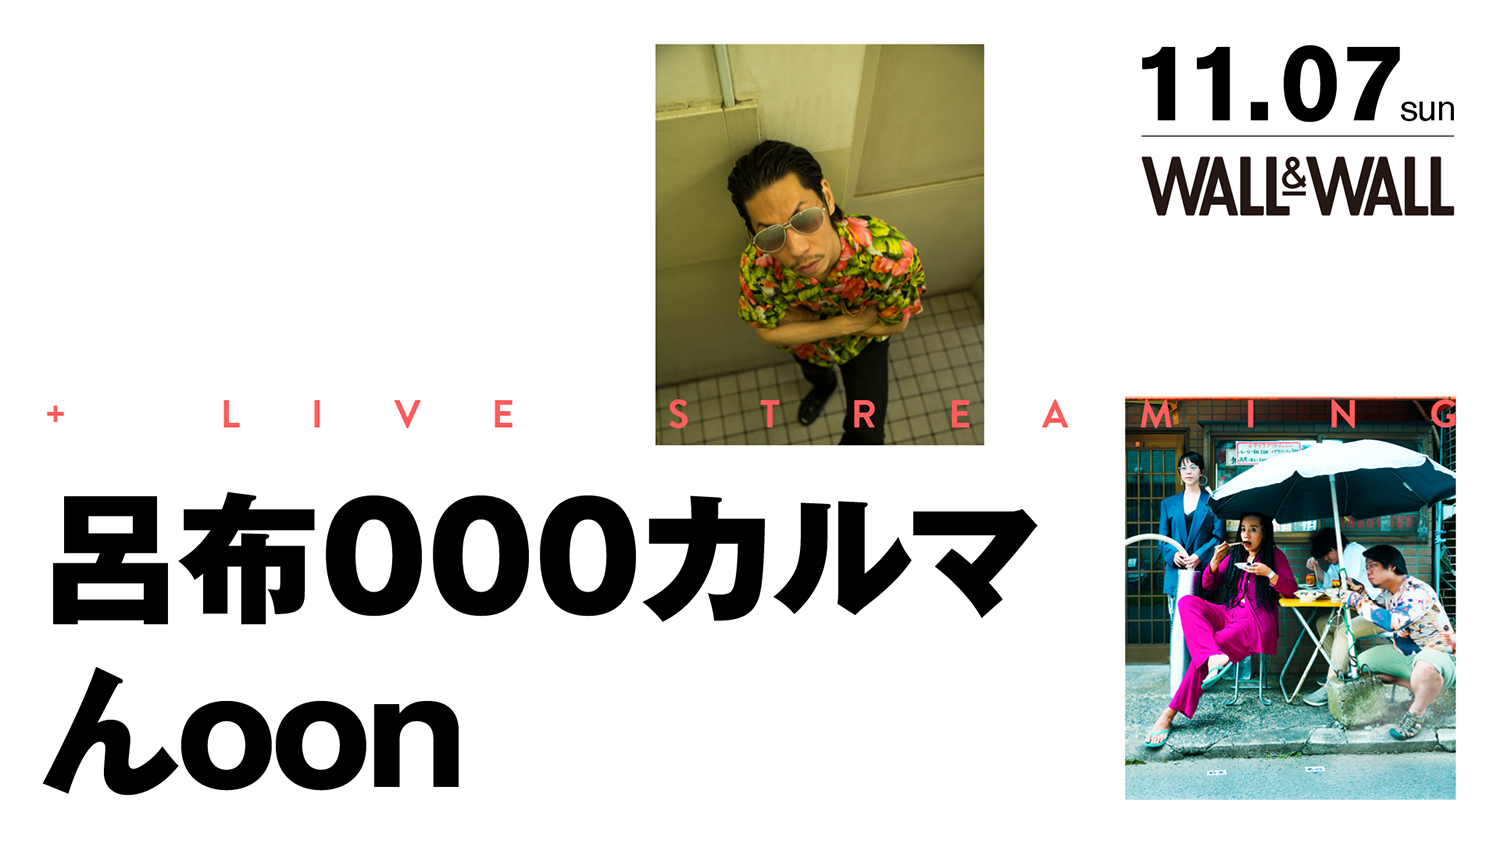 W&Wバナー2021_1107_HZ.png